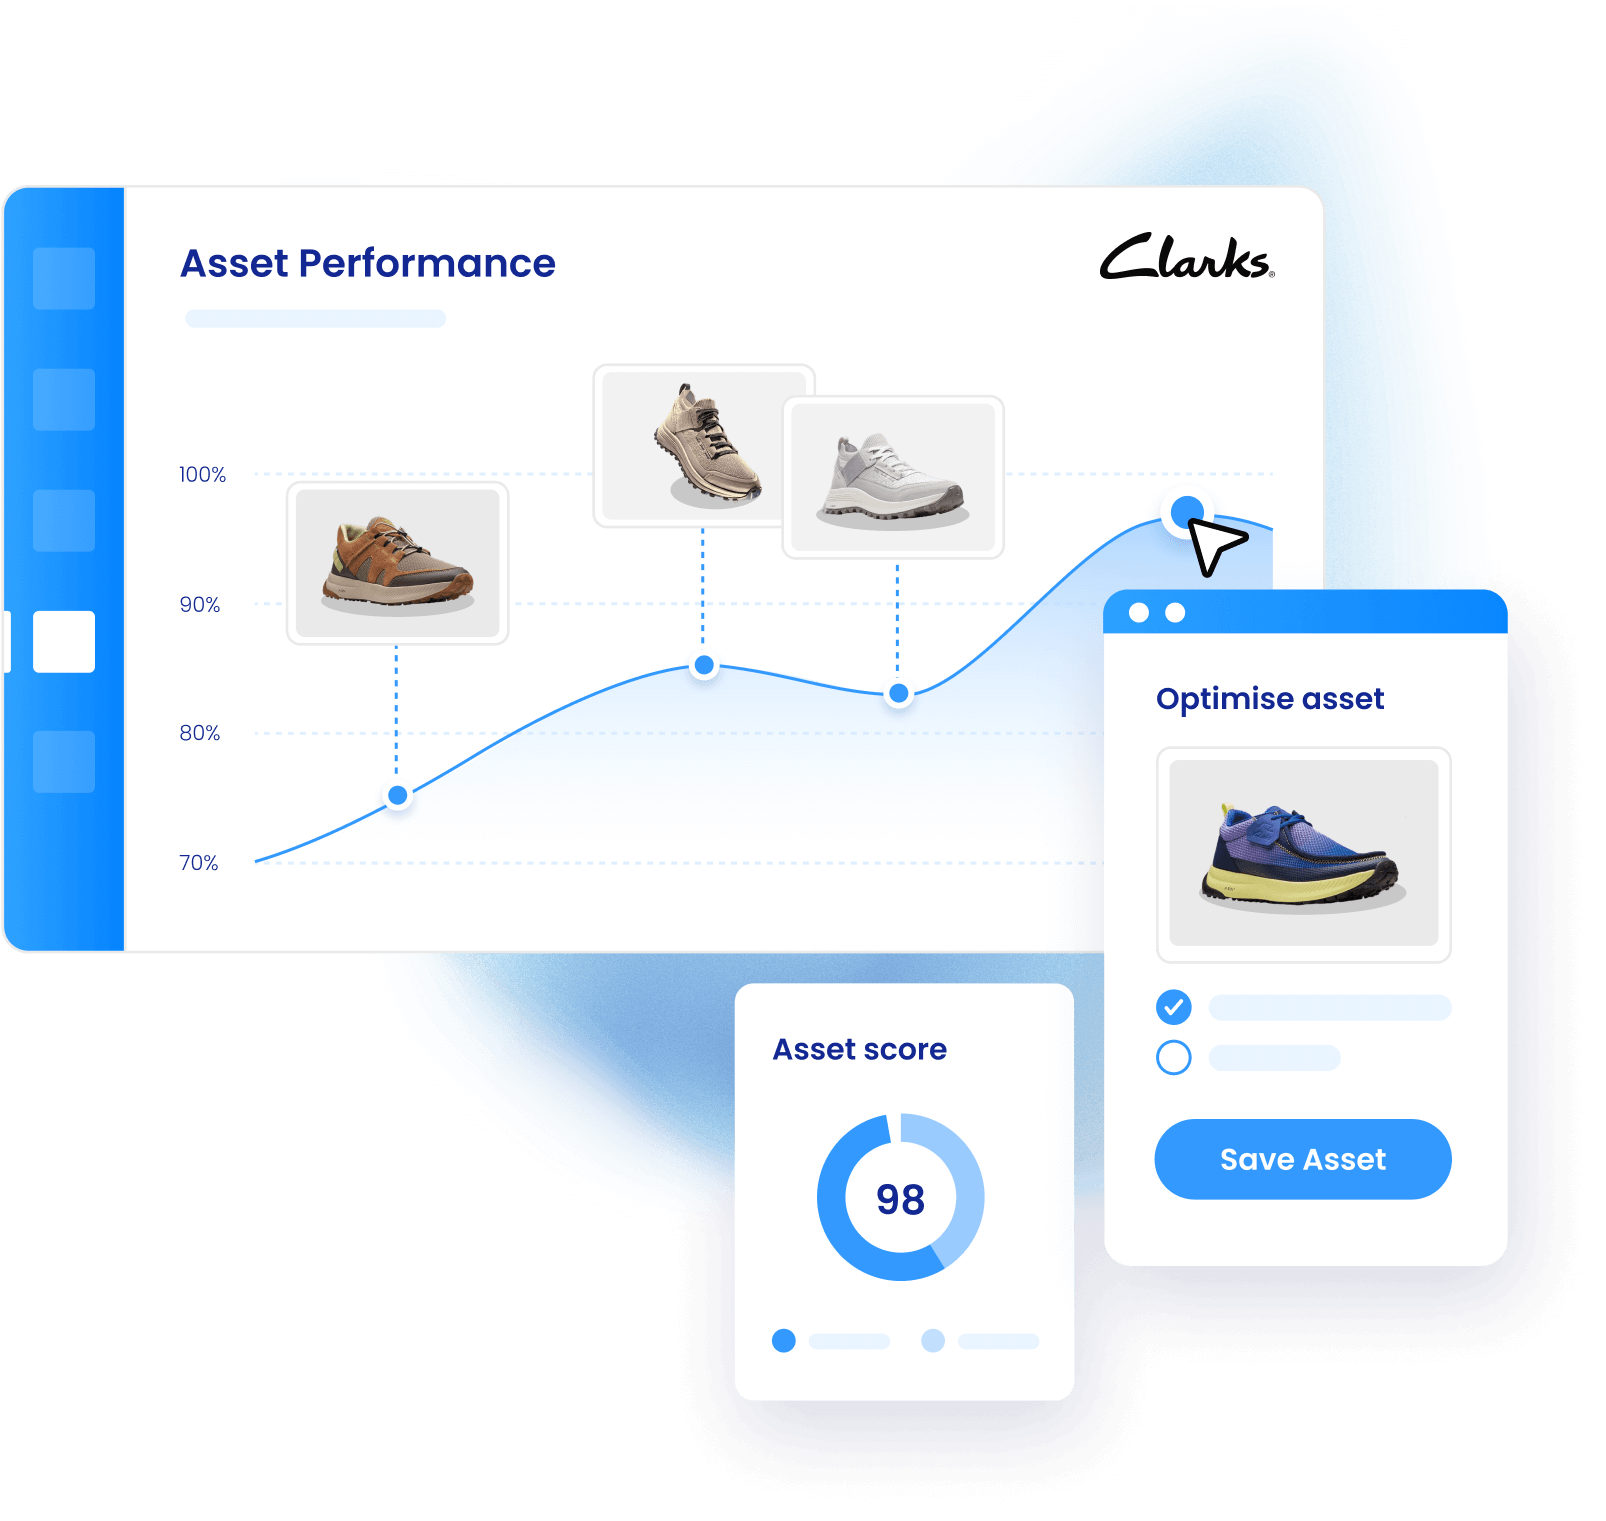 Find, modify and share all your creative content in seconds like Clarks does, with Storyteq's ActiveDAM.